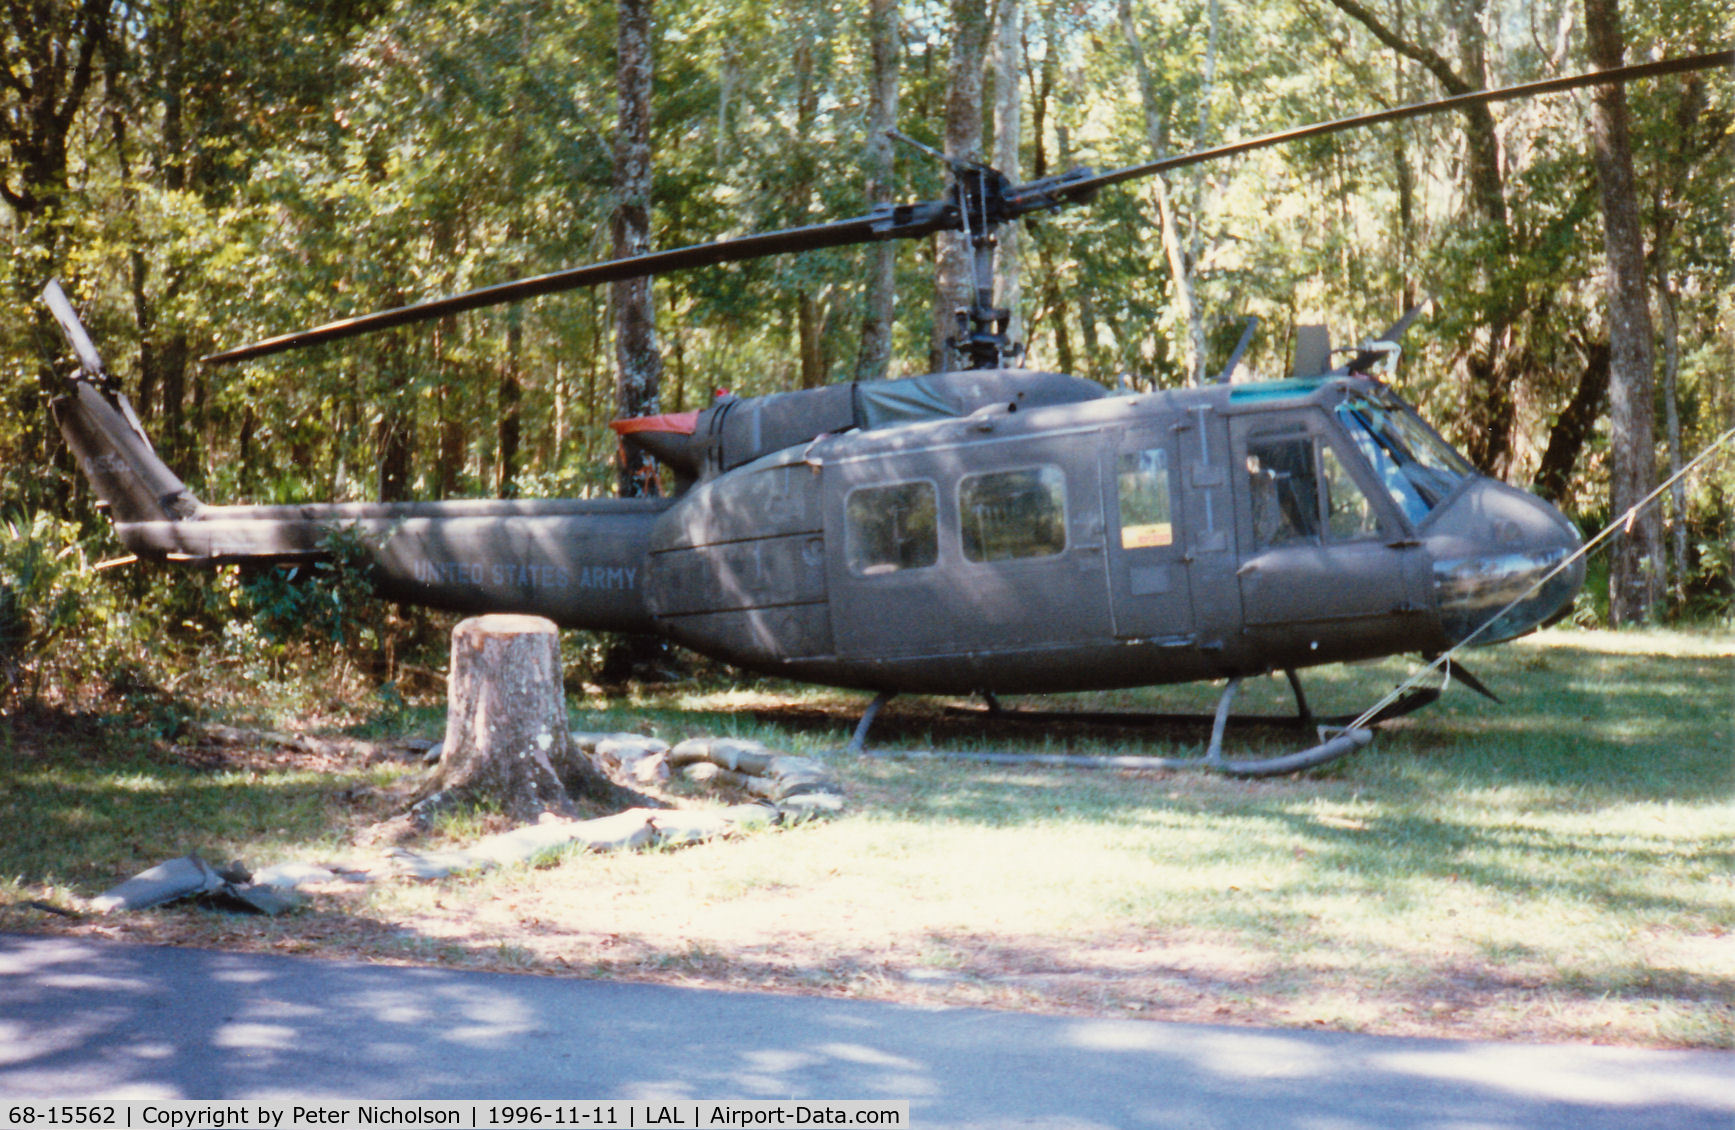 68-15562, 1968 Bell UH-1H Iroquois C/N 10492, UH-1H Iroquois on display in the grounds of the Florida Air Museum at Lakeland in November 1996.